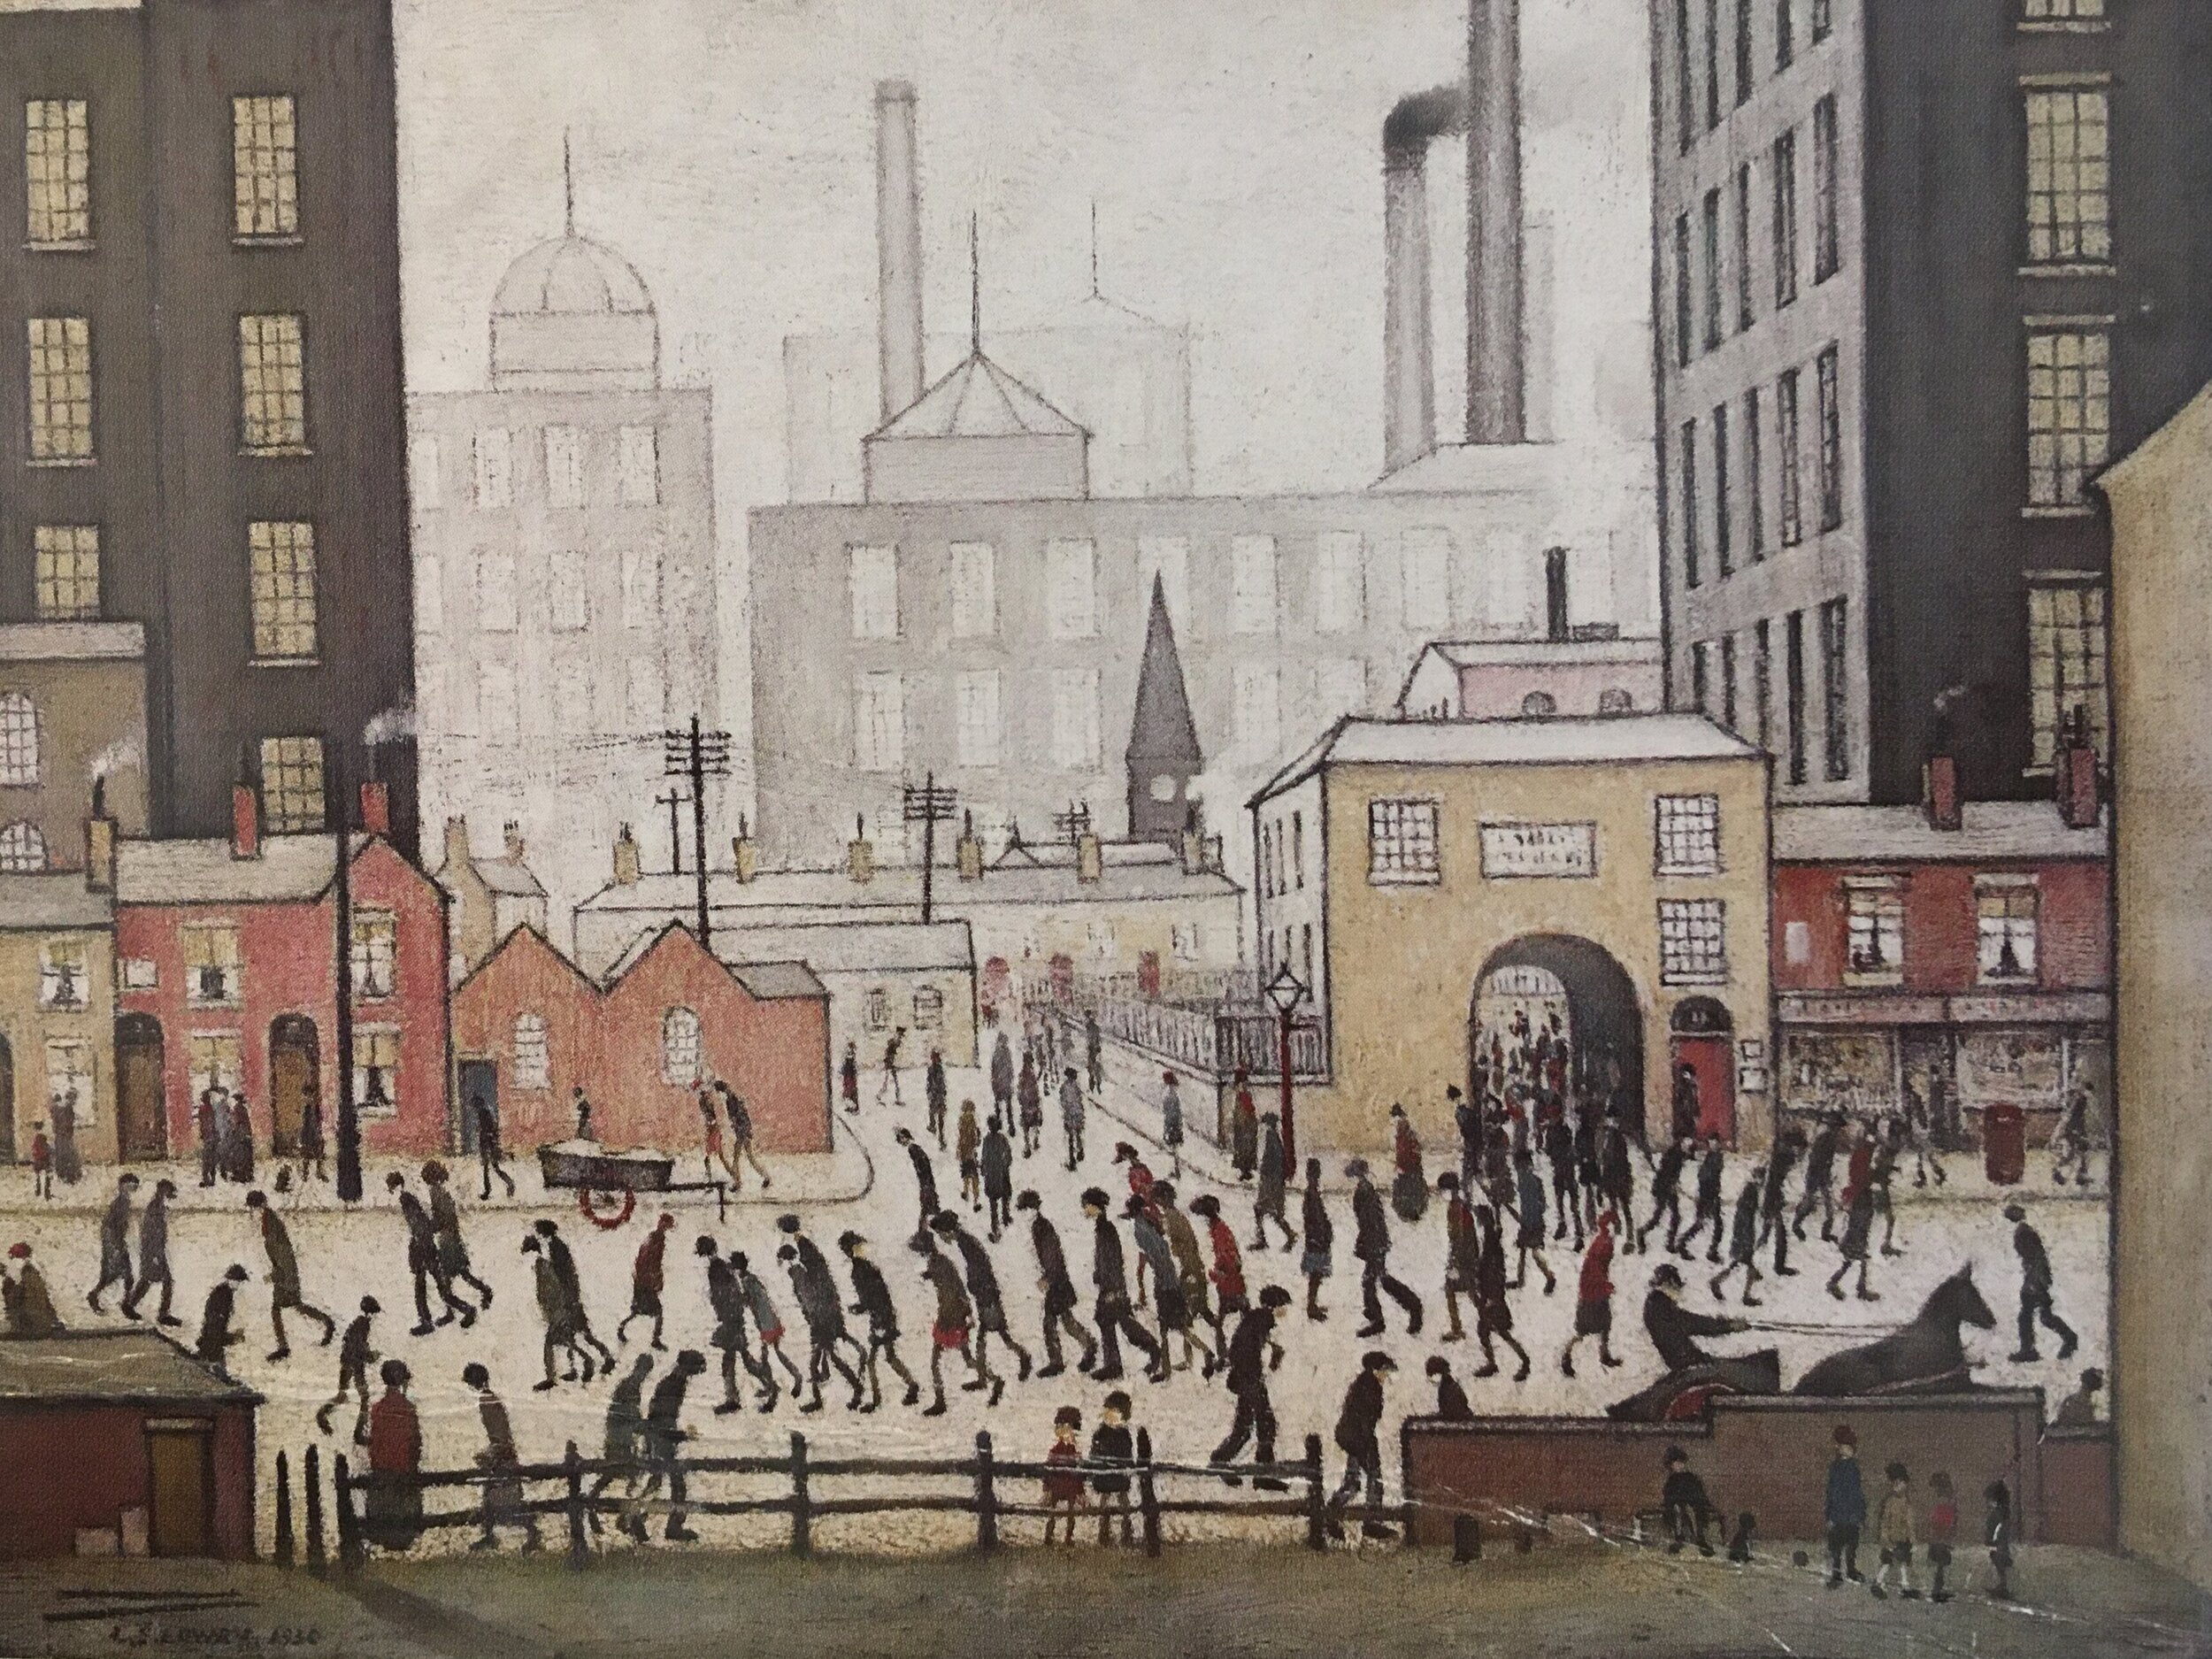 Coming+From+Mill+by+LS+Lowry.jpg